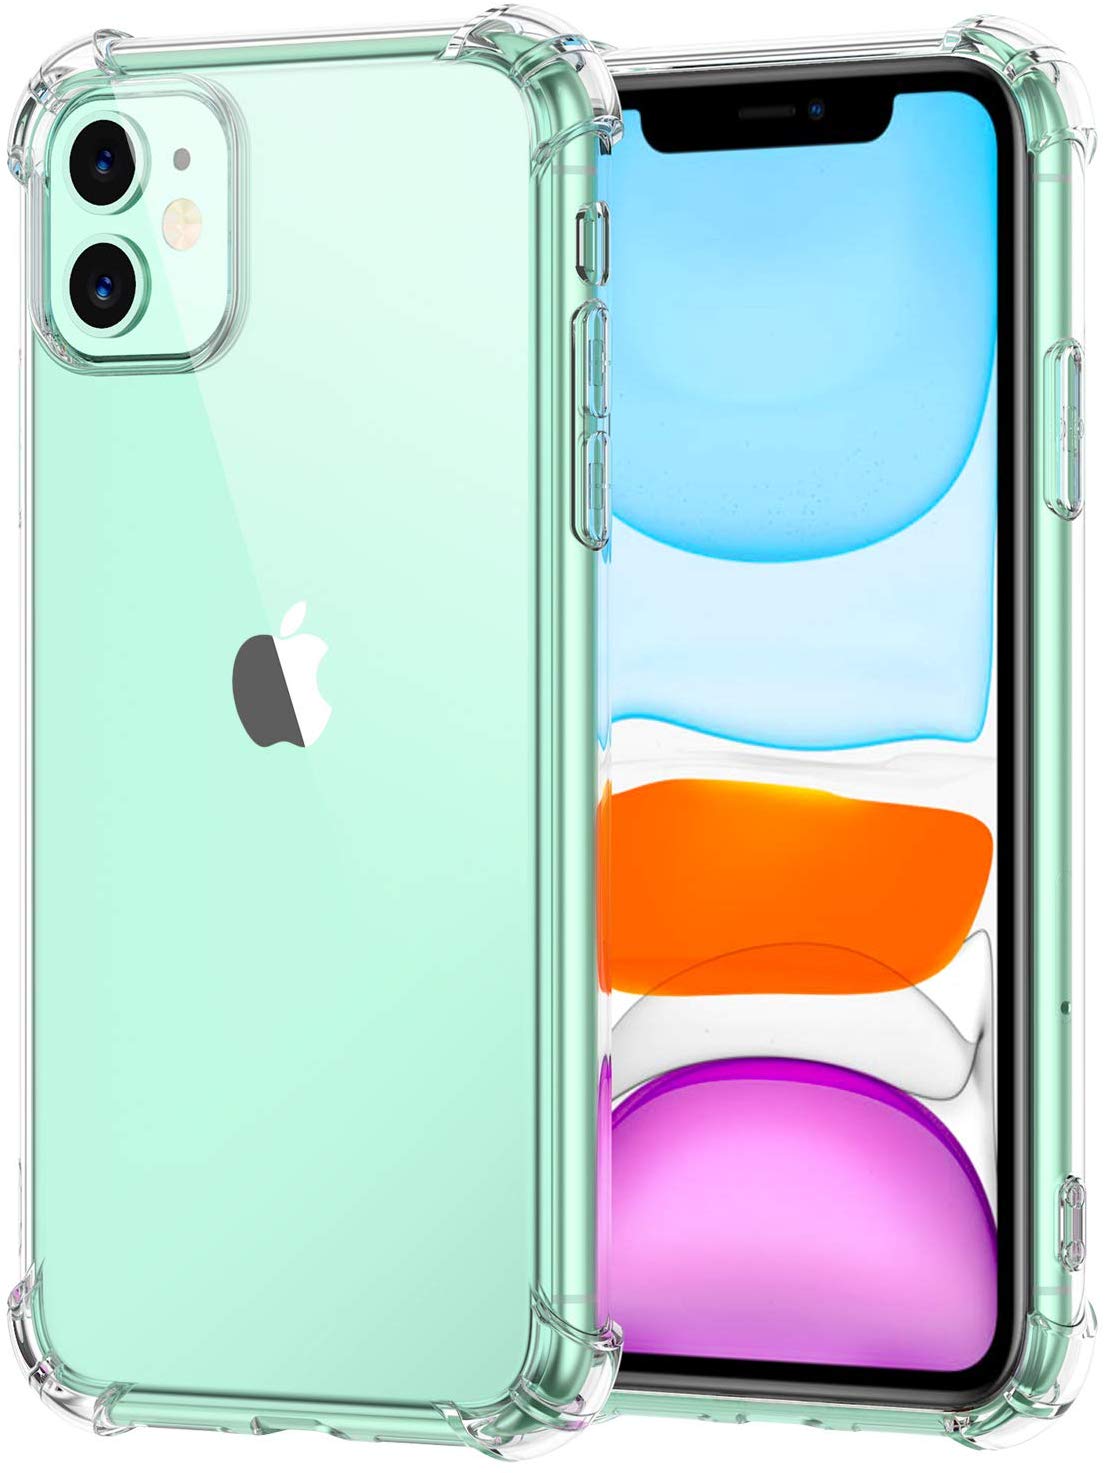 Njjex iPhone 11 / iPhone XR / iPhone 12 Pro Max Case, Njjex iPhone 11 Crystal Clear Shock Absorption Technology Bumper Soft TPU Cover Case For Apple iPhone 11, 12 Mini, 12 Pro Max - image 1 of 6